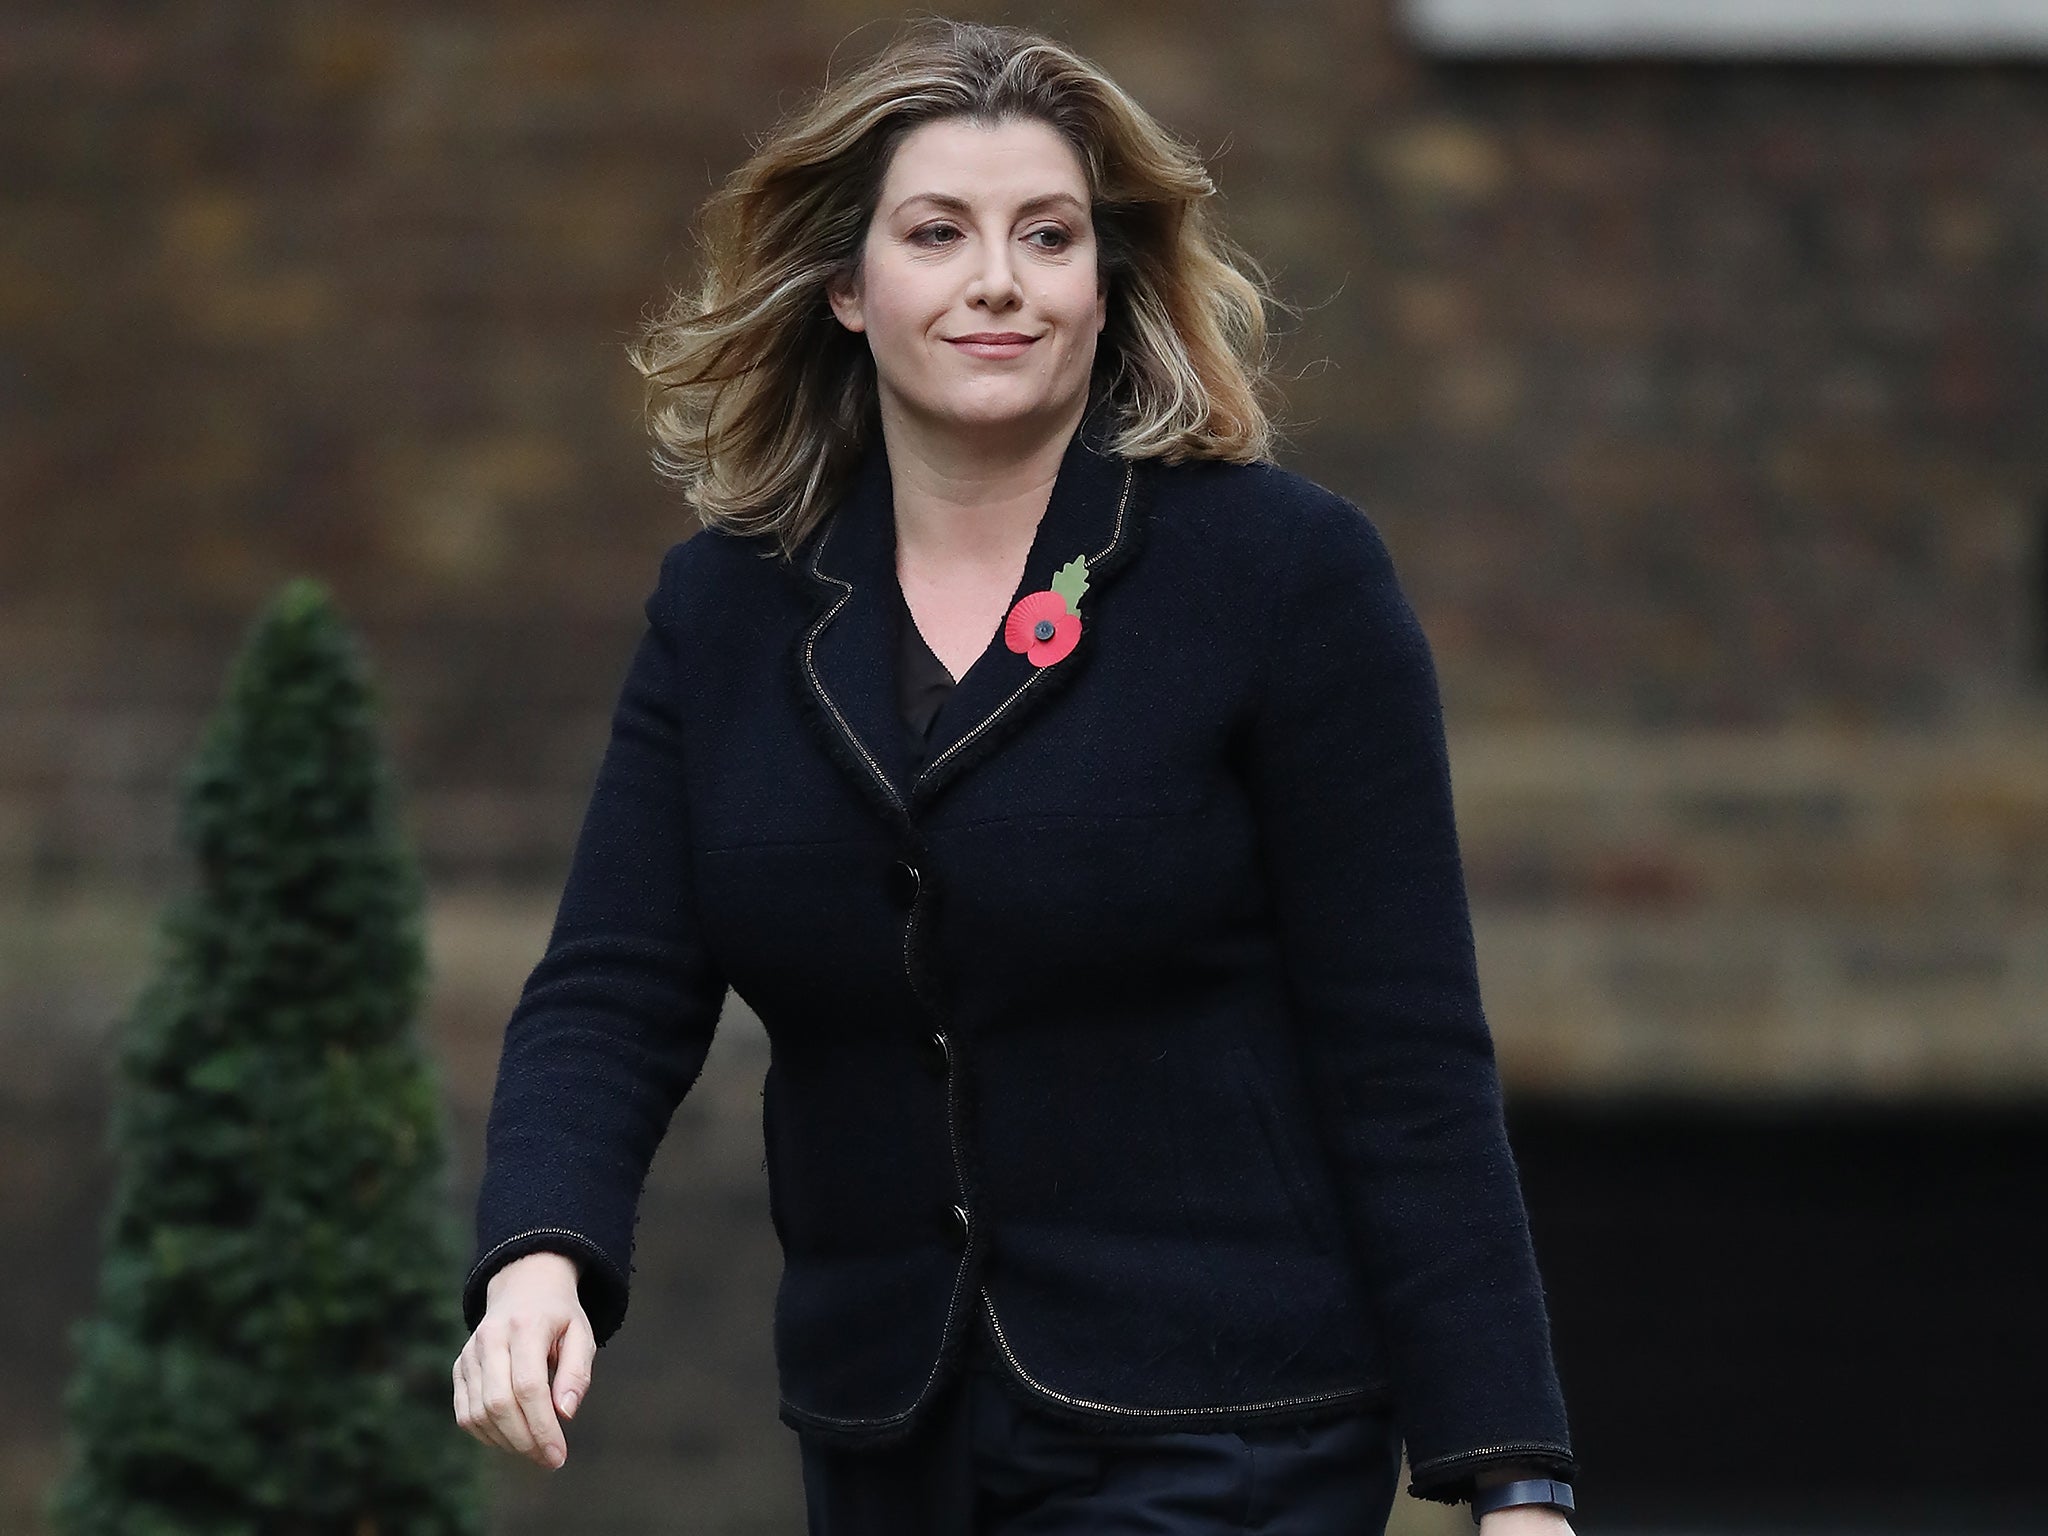 Penny Mordaunt has suggested she does not believe people should be allowed to legally change their gender without first undergoing a medical evaluation